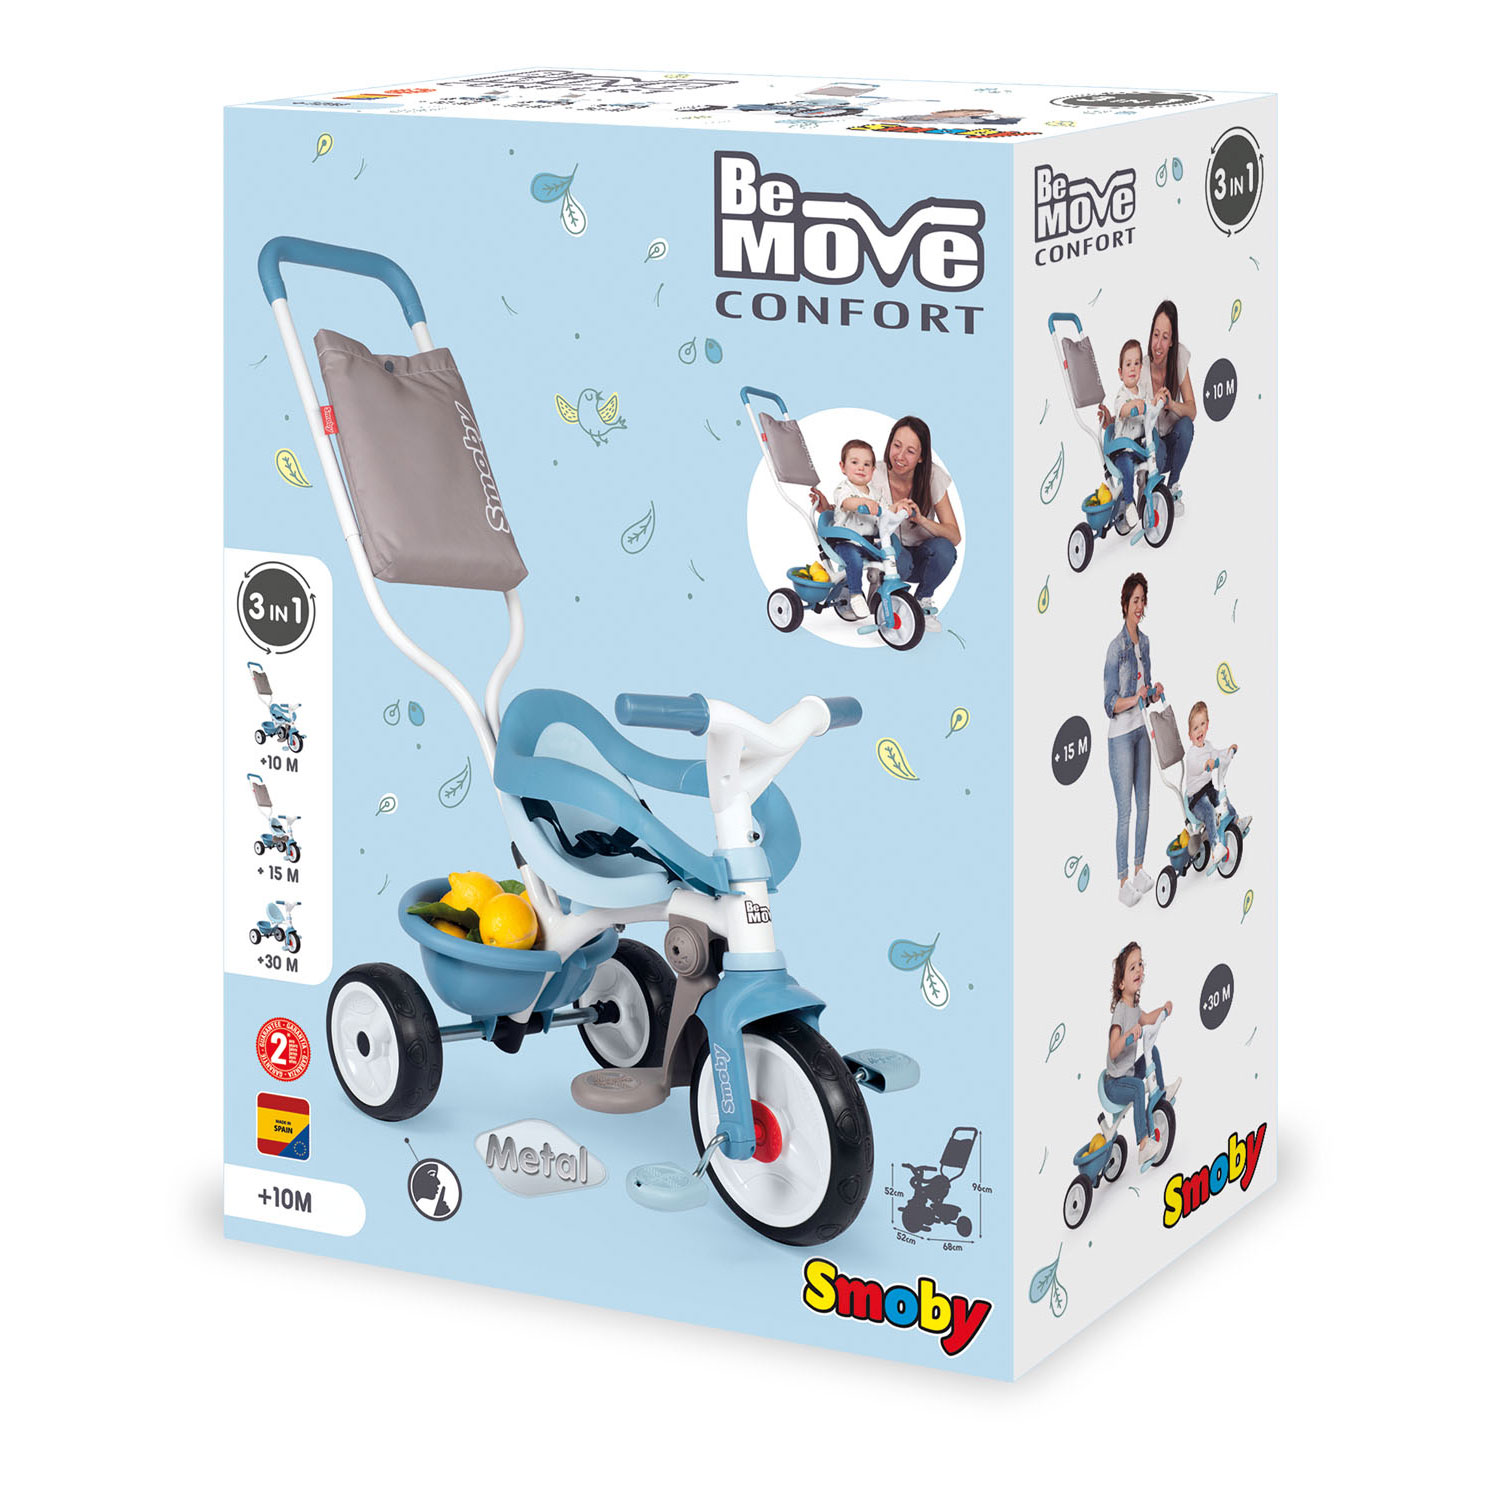 Smoby Be Move Comfort Driewieler Blauw ... Lobbes